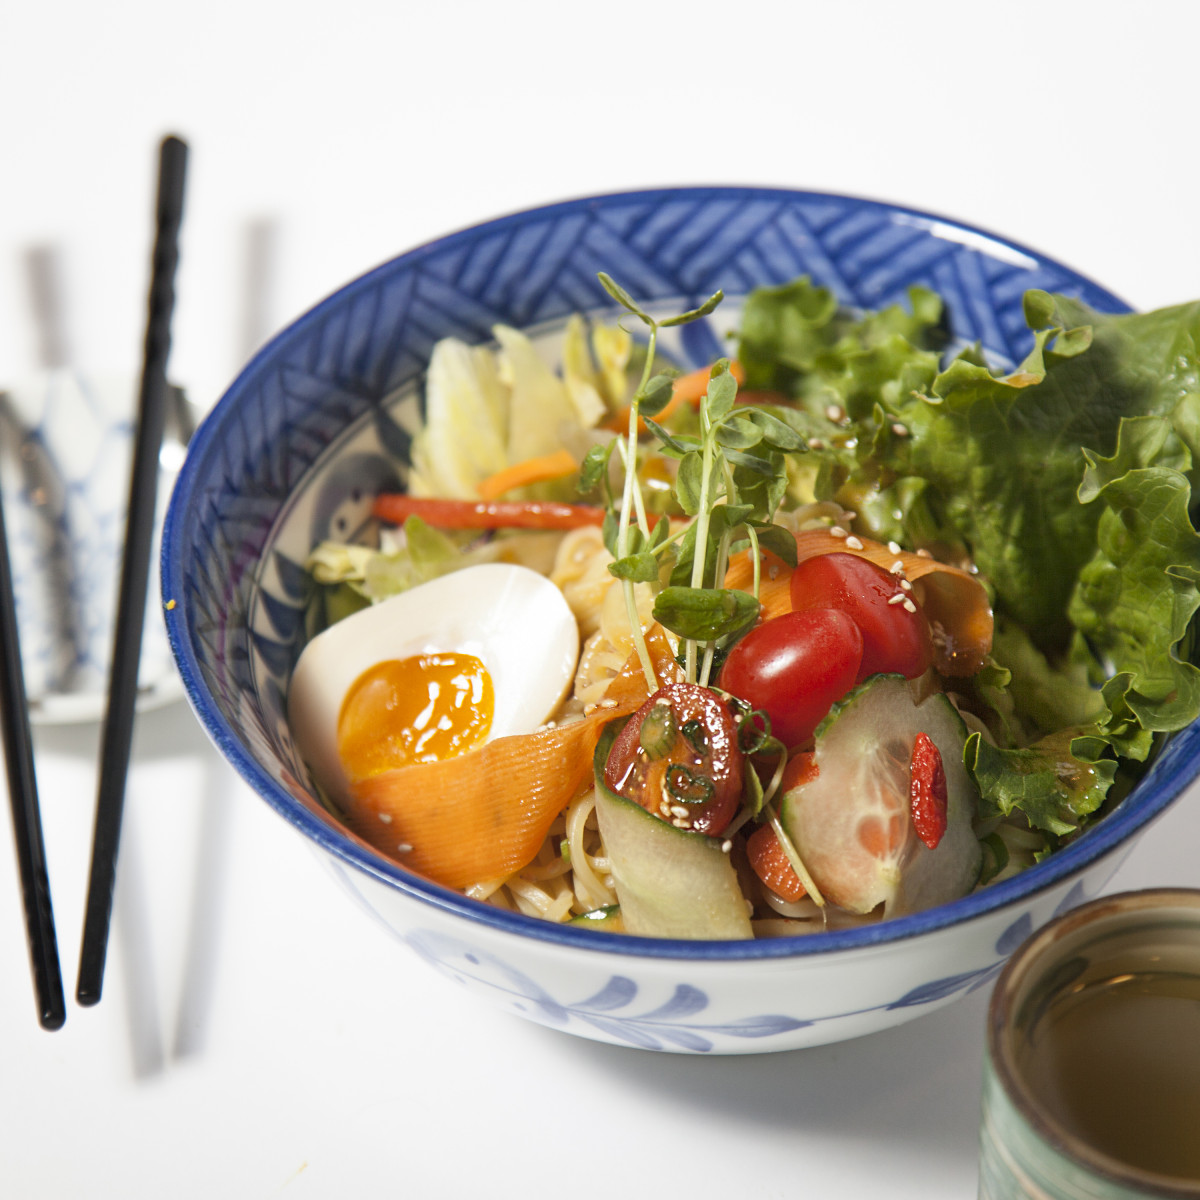 Cool Down With Cold Ramen Salad!